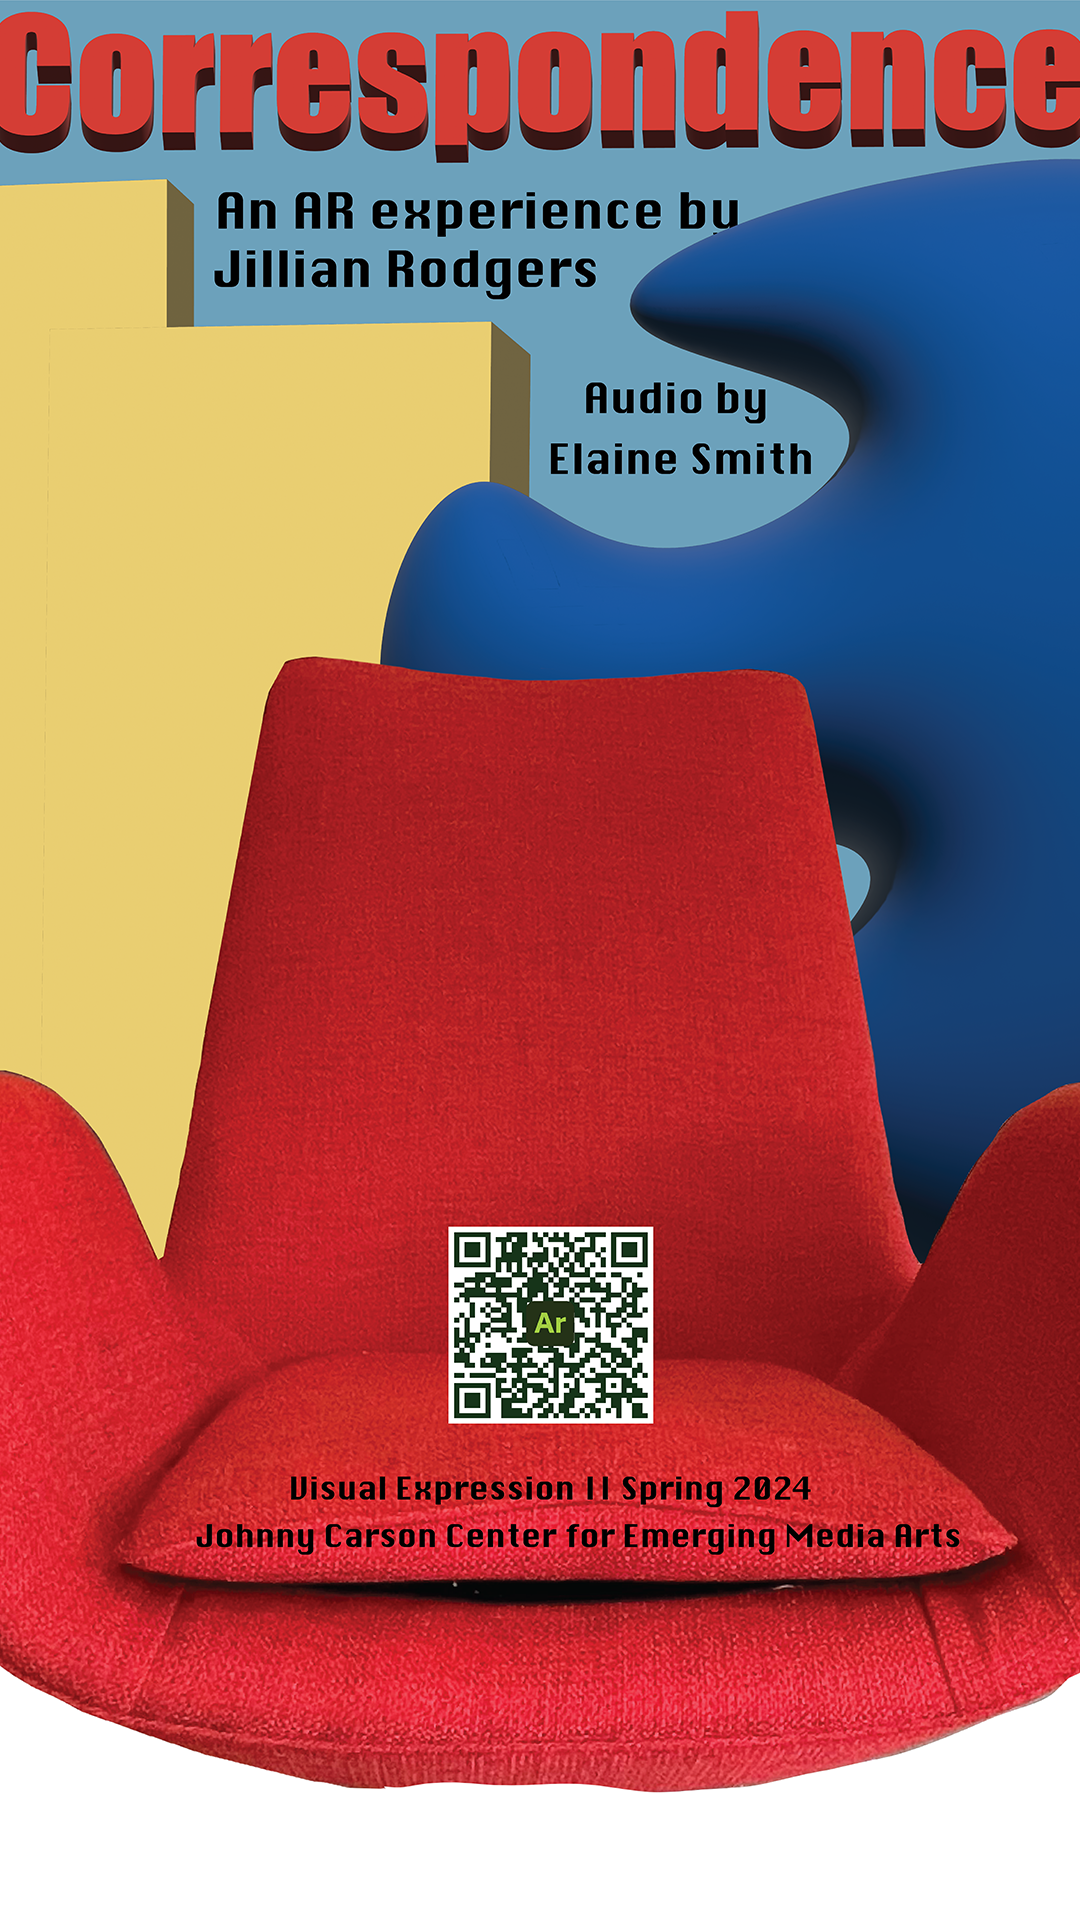 Red chair with QR code seated in it. Blue and Yellow shapes fill the background the text reads 'Correspondence An AR experience by Jillian Rodgers Audio by Elaine Smith' 